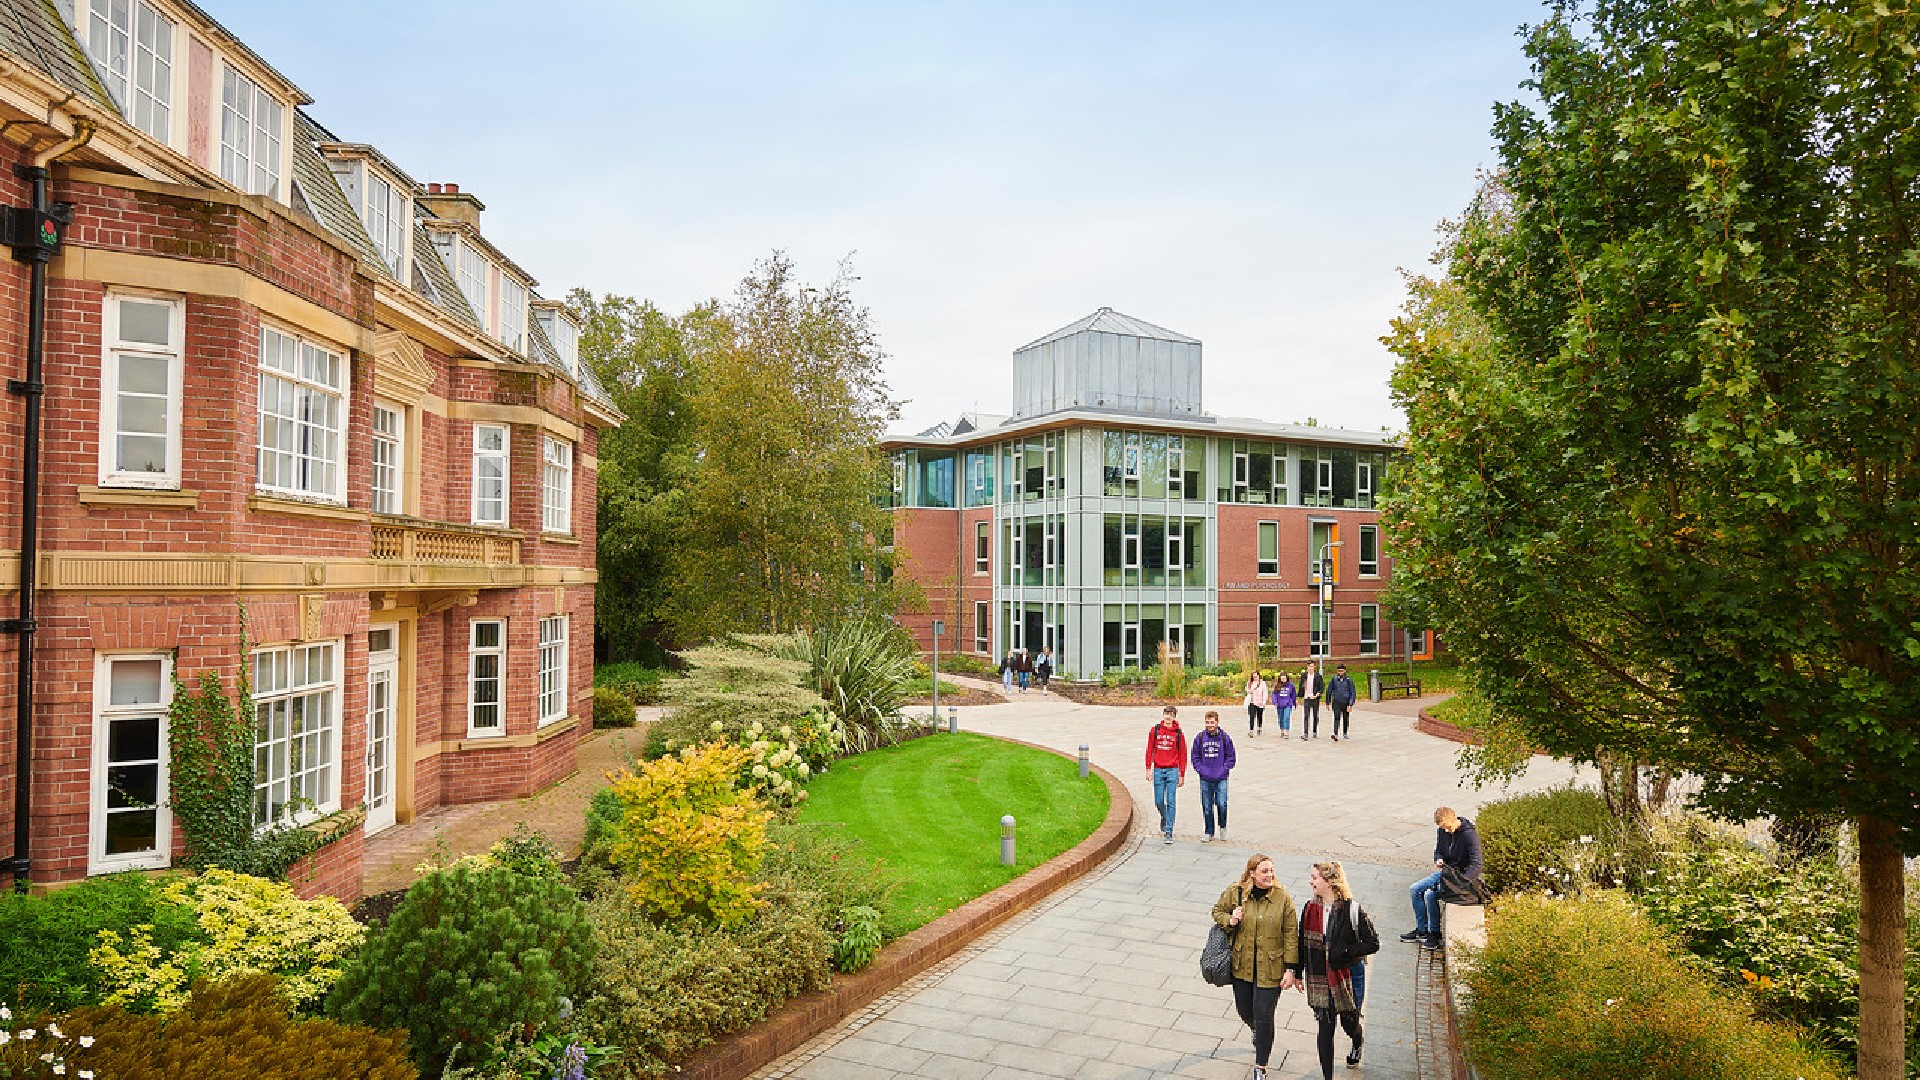 An image of multiple groups of people walking through Edge Hill Universities campus.